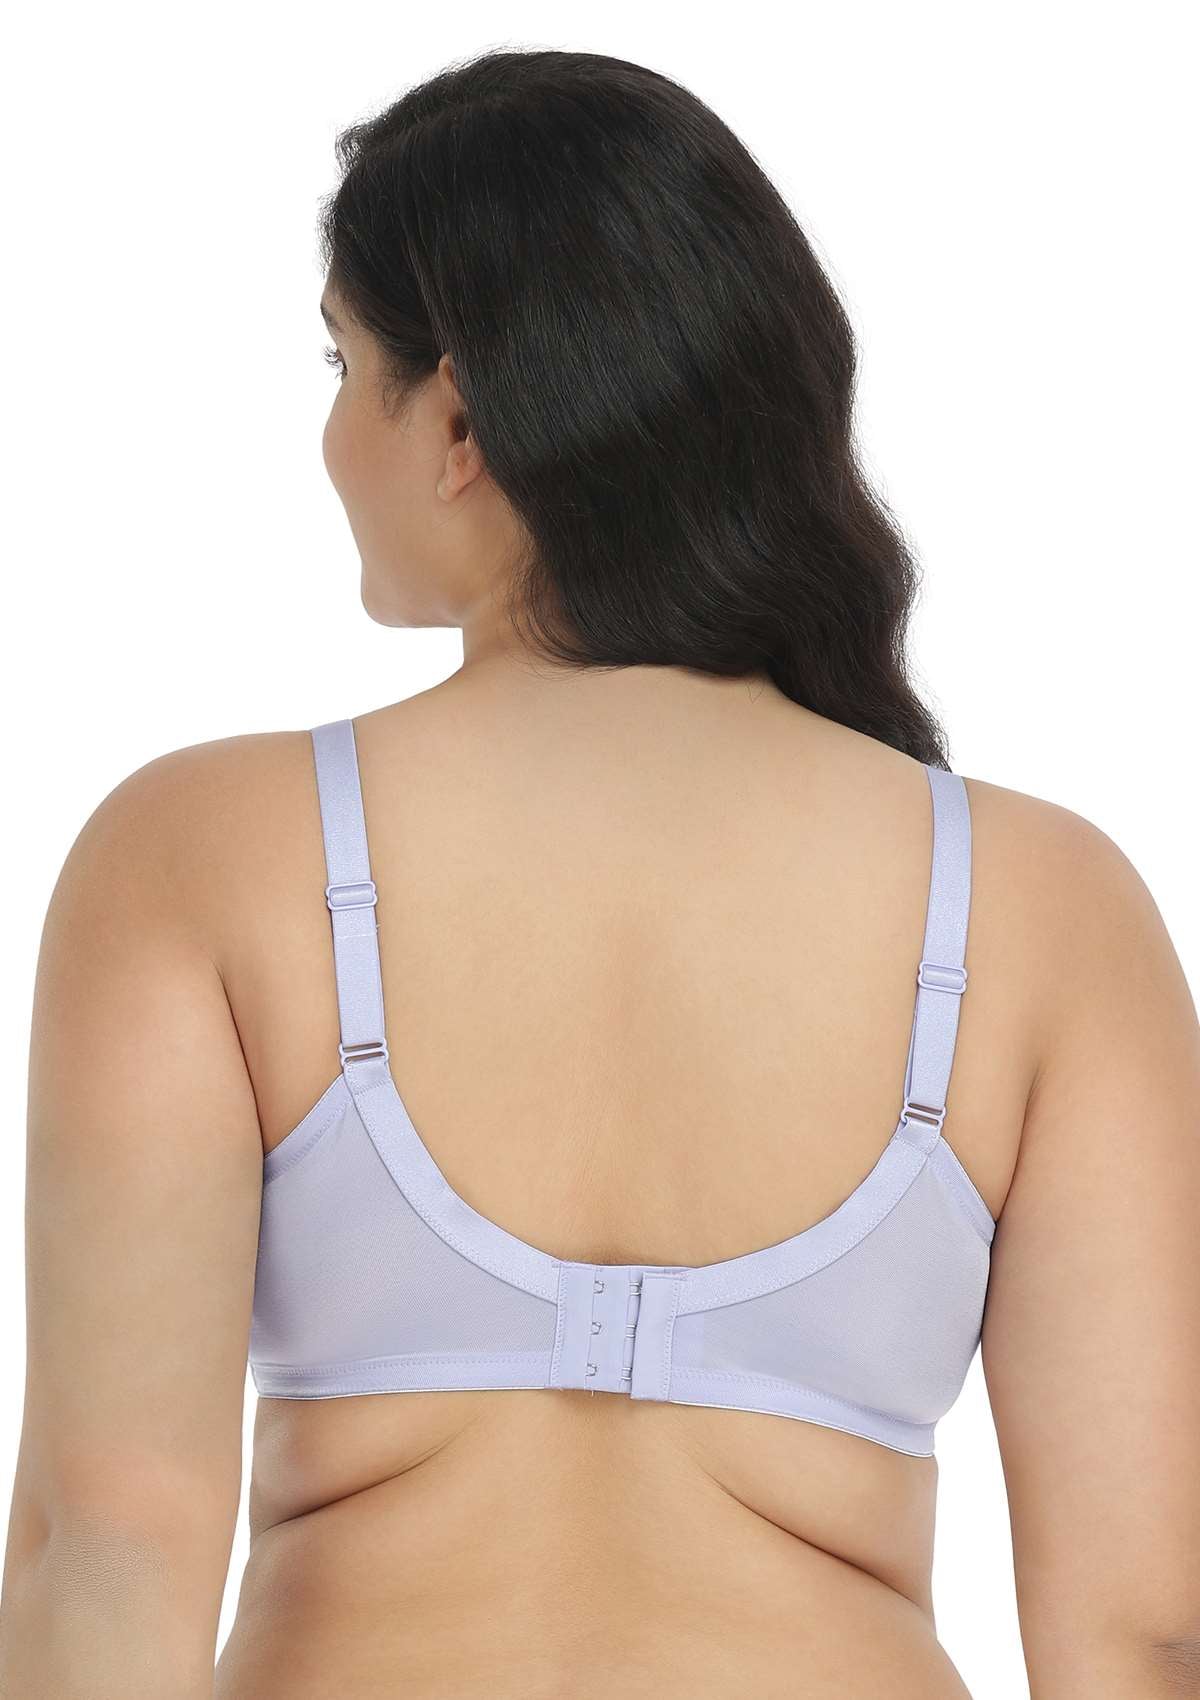 HSIA Wisteria Bra For Lift And Support - Full Coverage Minimizer Bra - Light Pink / 36 / C